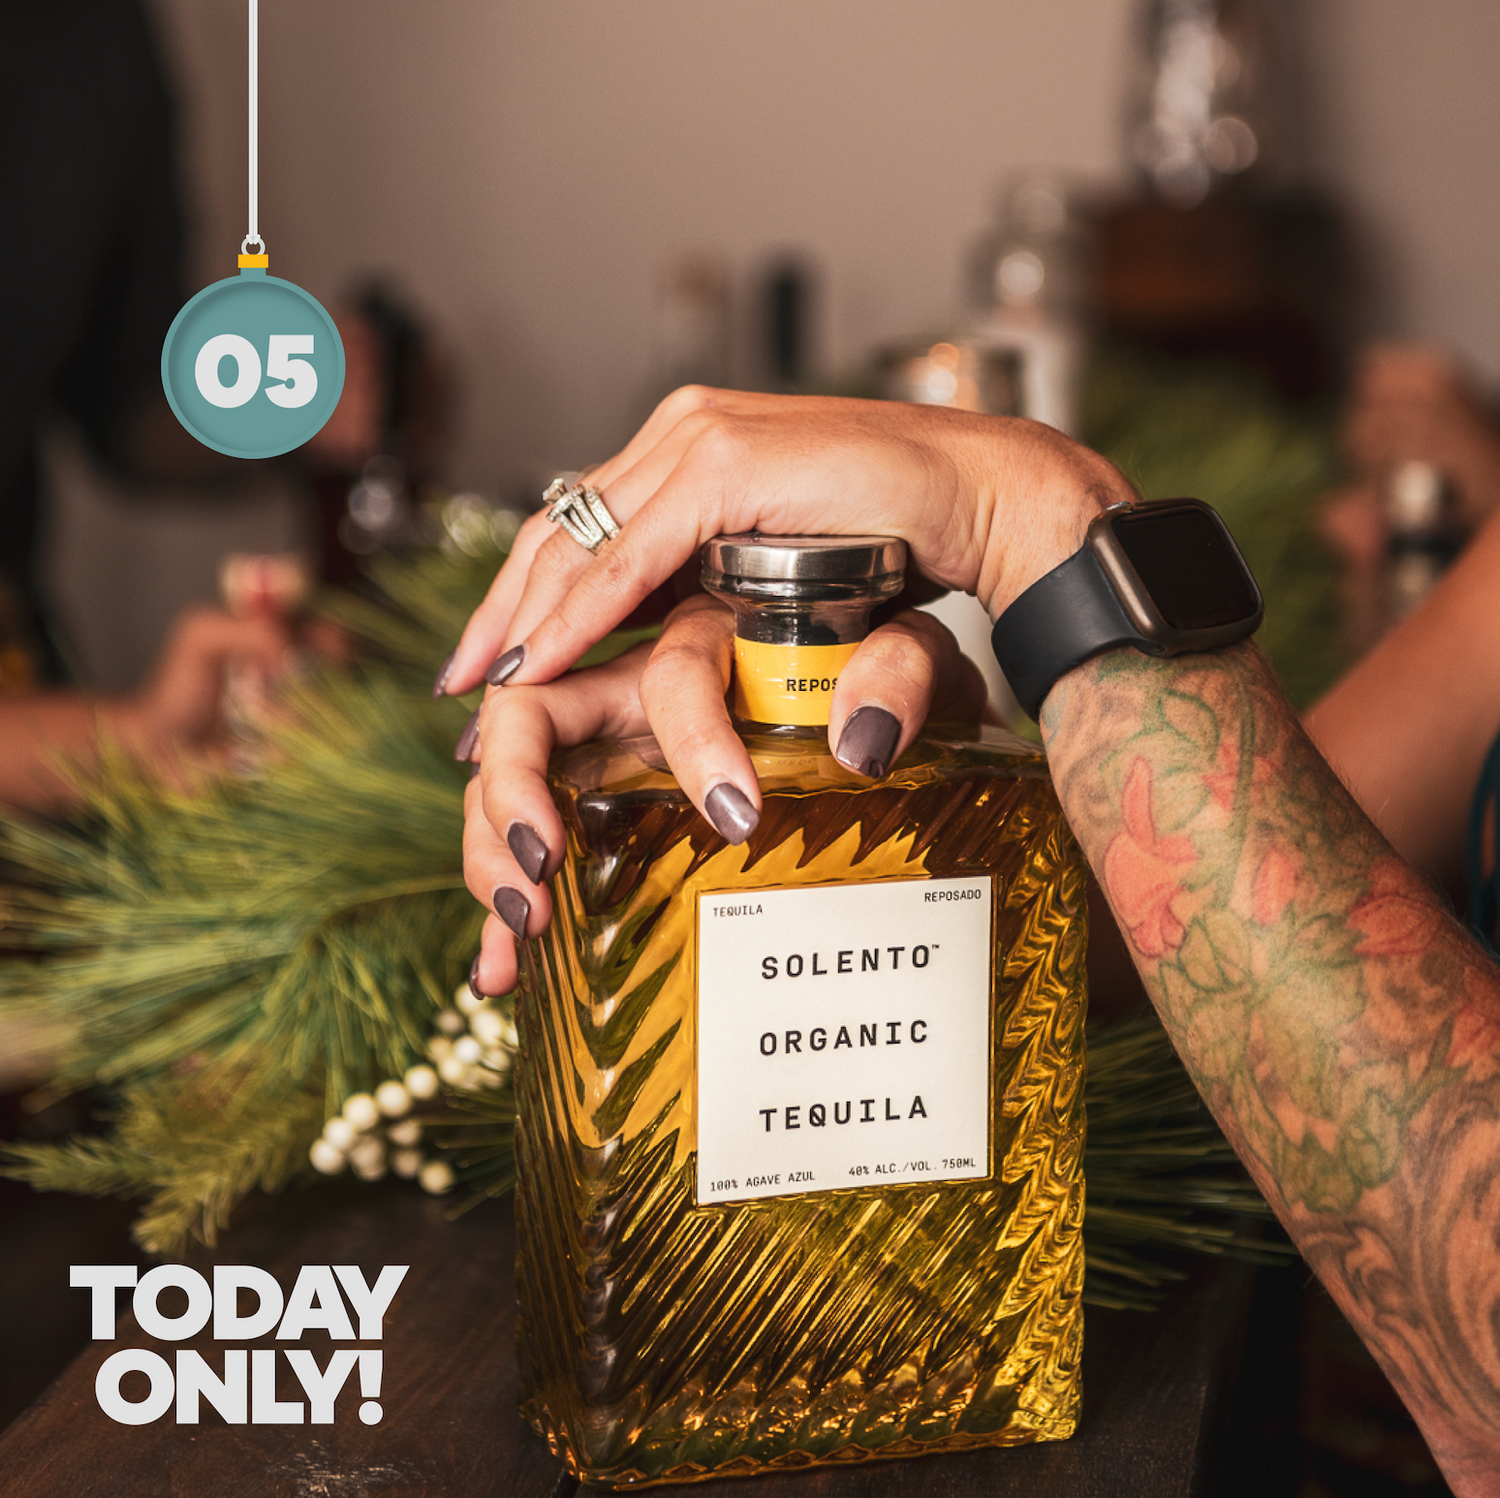 EXPIRED: Buy any 3 bottles of Solento Organic Tequila, get a bottle of Blanco FREE